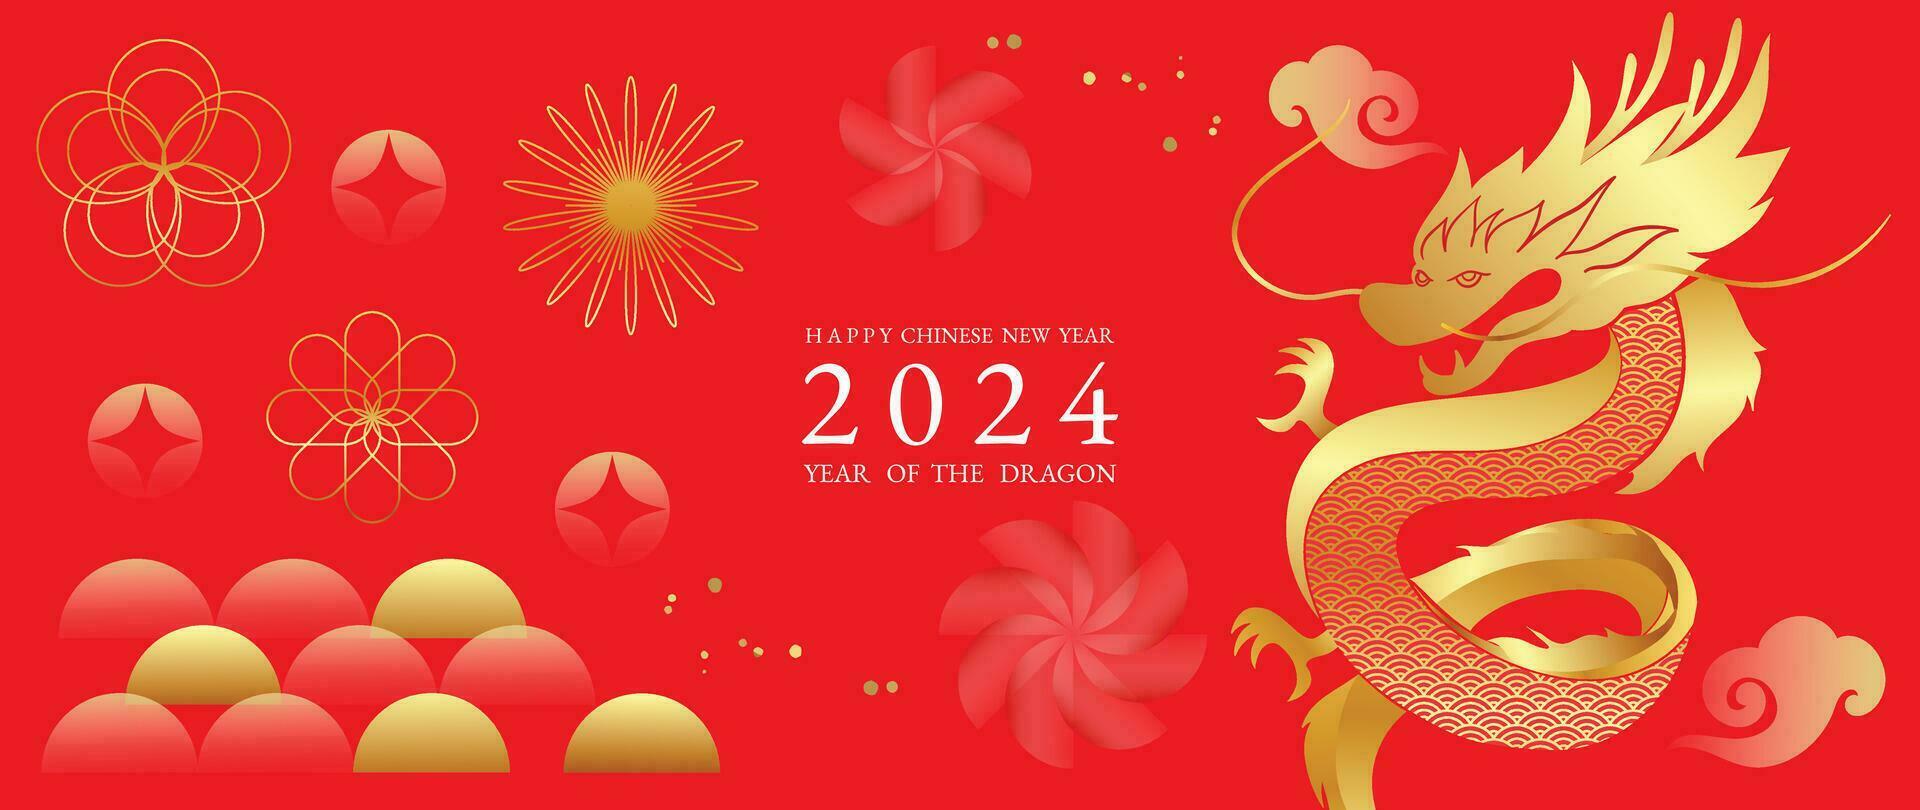 Happy Chinese new year background vector. Year of the dragon design wallpaper with dragon, flower, cloud, sparkle. Modern luxury oriental illustration for cover, banner, website, decor. vector